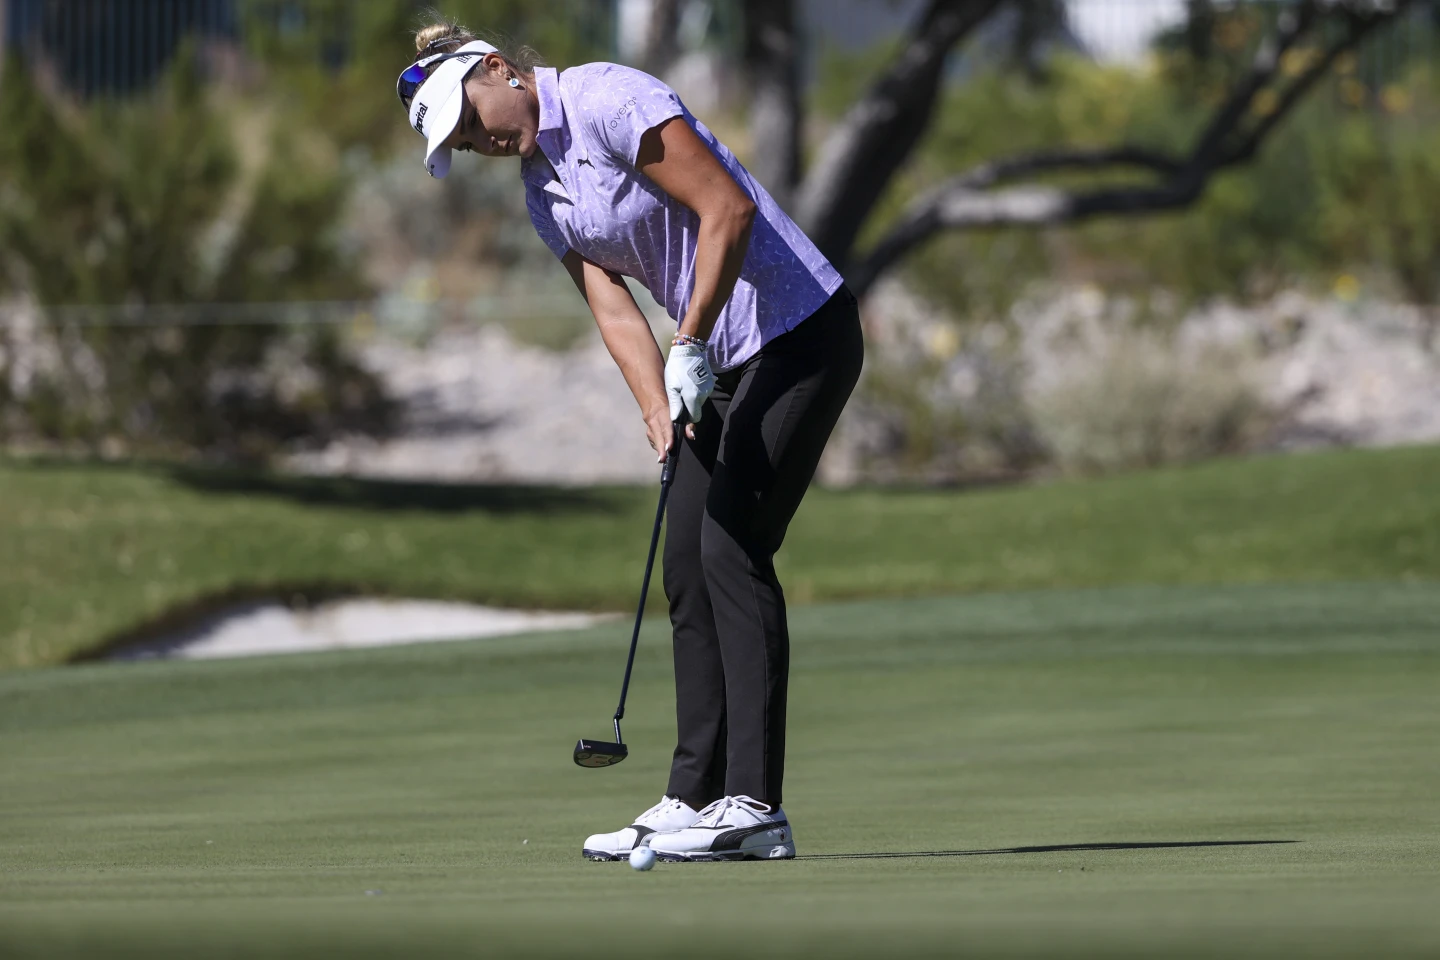 Lexi Thompson falls short by 3 shots at Shriners Children's Open